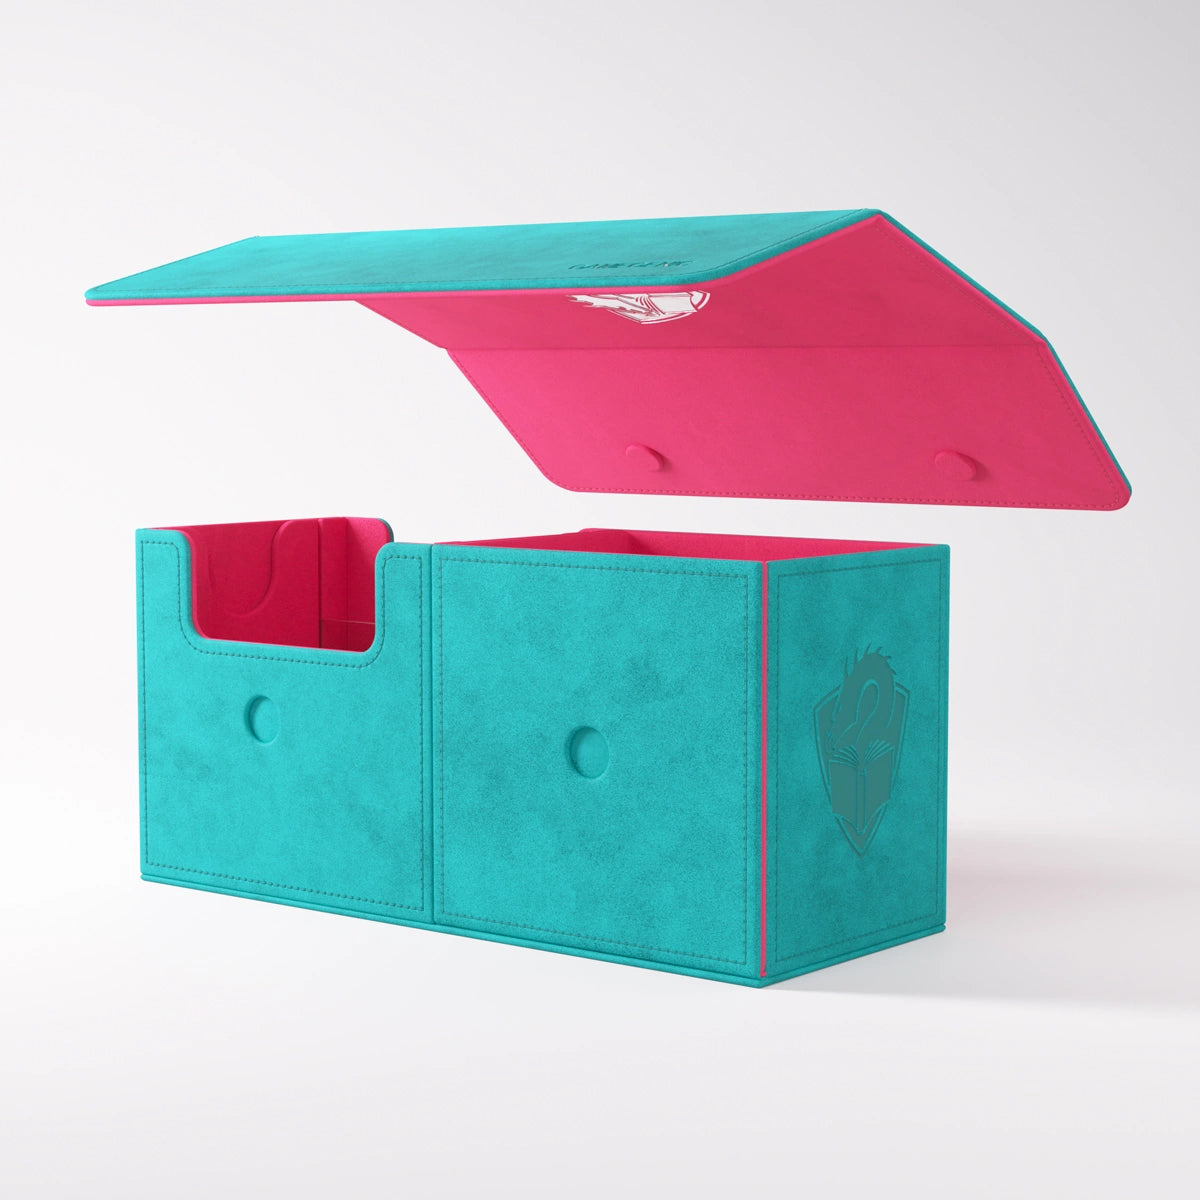 Deck Box: The Academic 133+ XL Teal/Pink Tolarian Edition